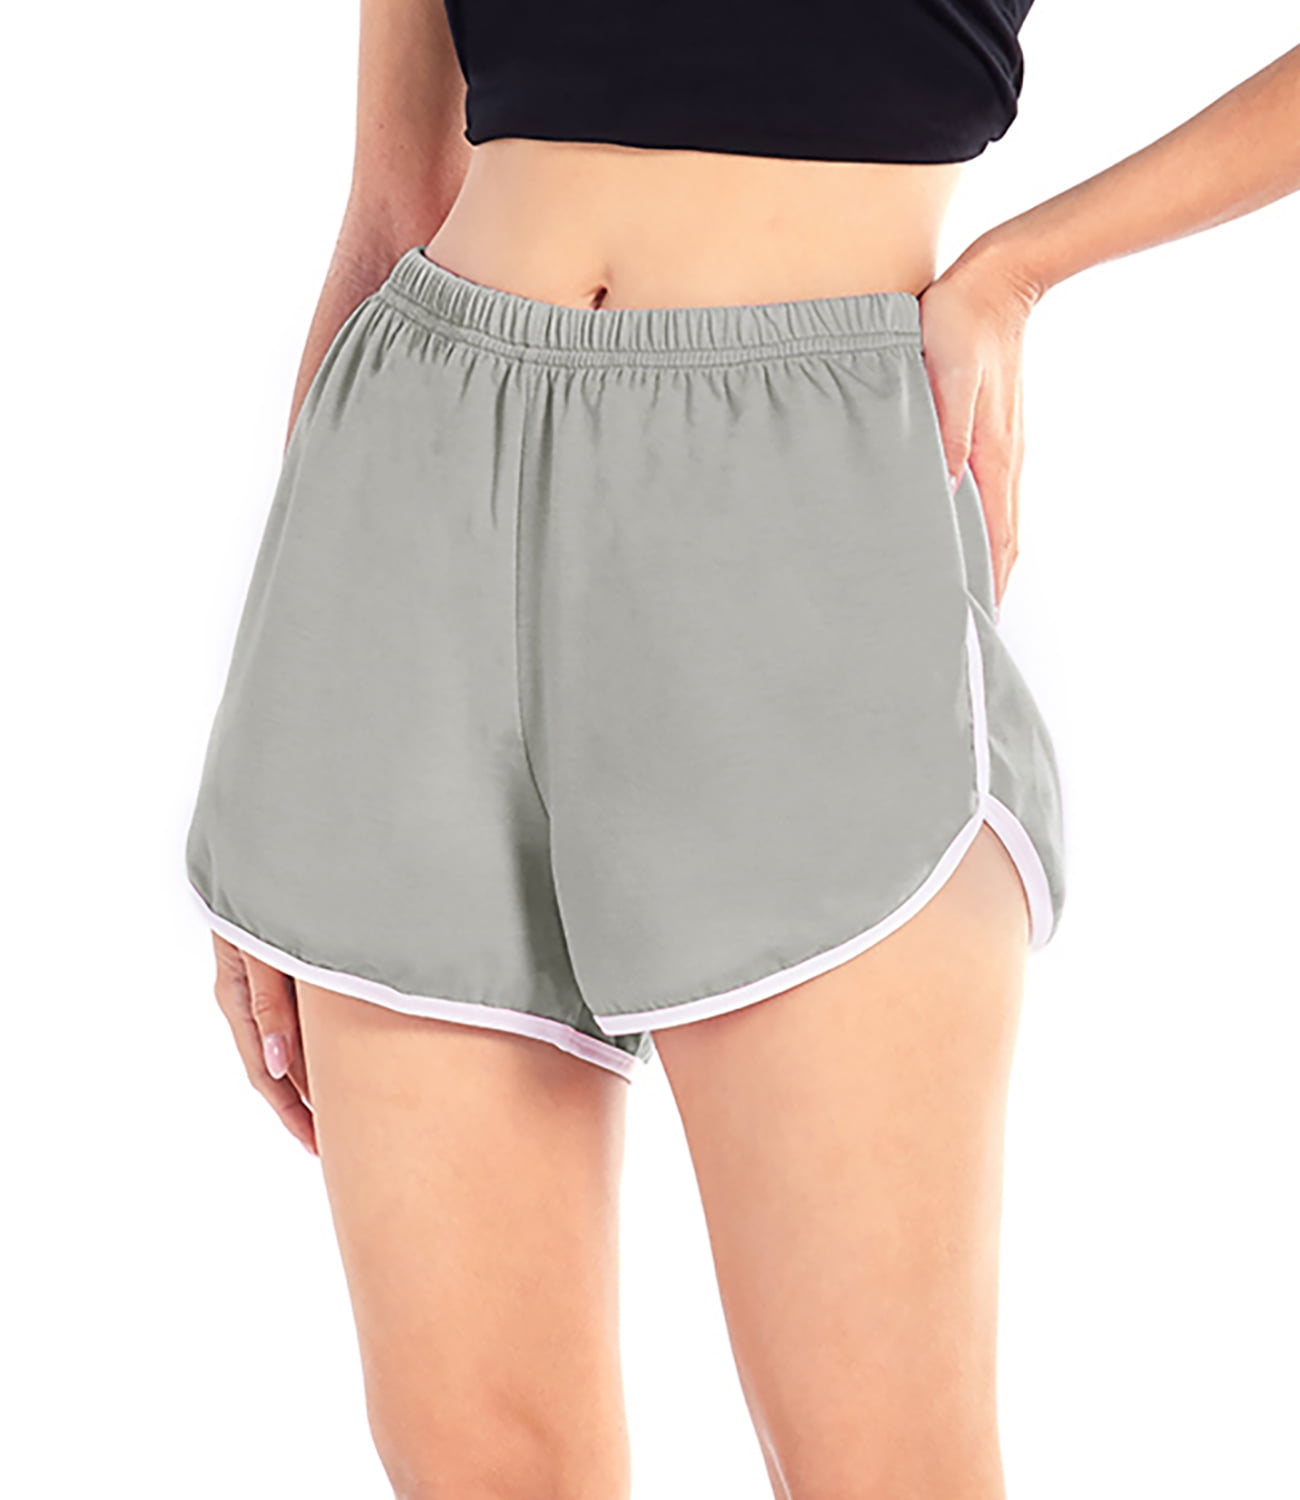 WBQ Teen Girls Performance Running Short,Elastic High Waistband Casual Gym  Shorts for Workout Yoga Fitness Sports Shorts Athletic Shorts Plain Lounge